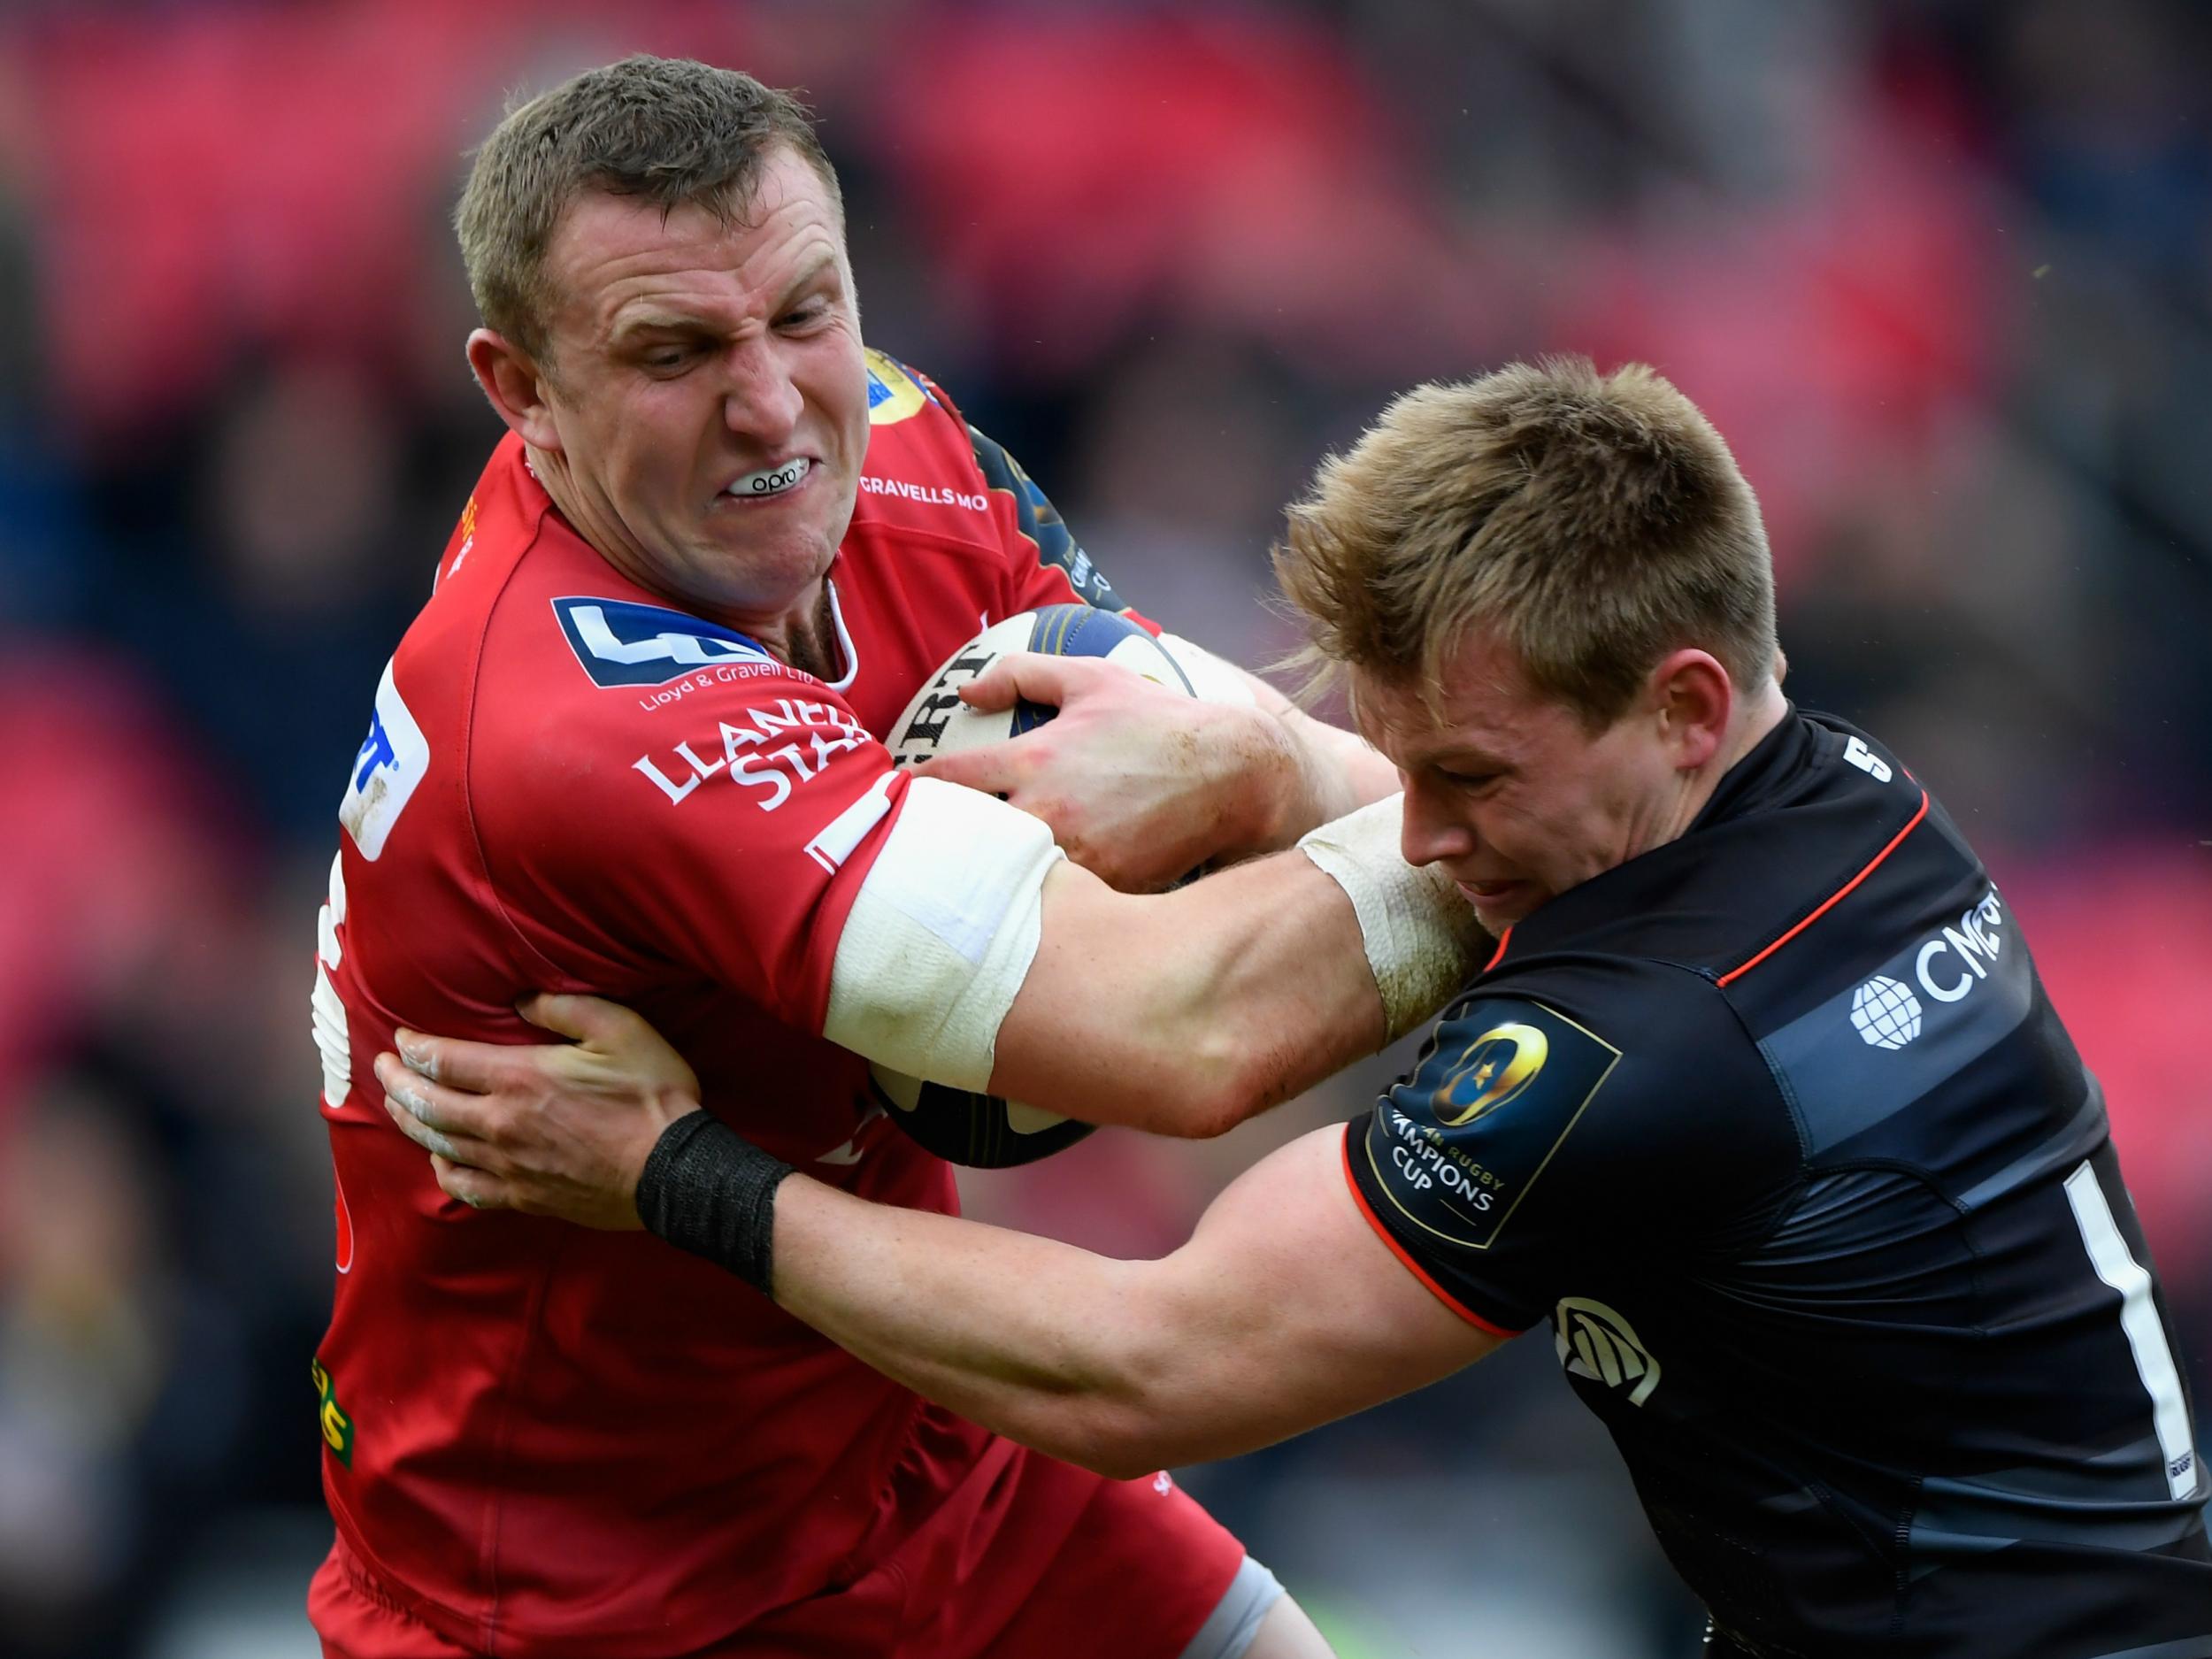 New Zealand-born Hadleigh Parkes will qualify for Wales on 2 December